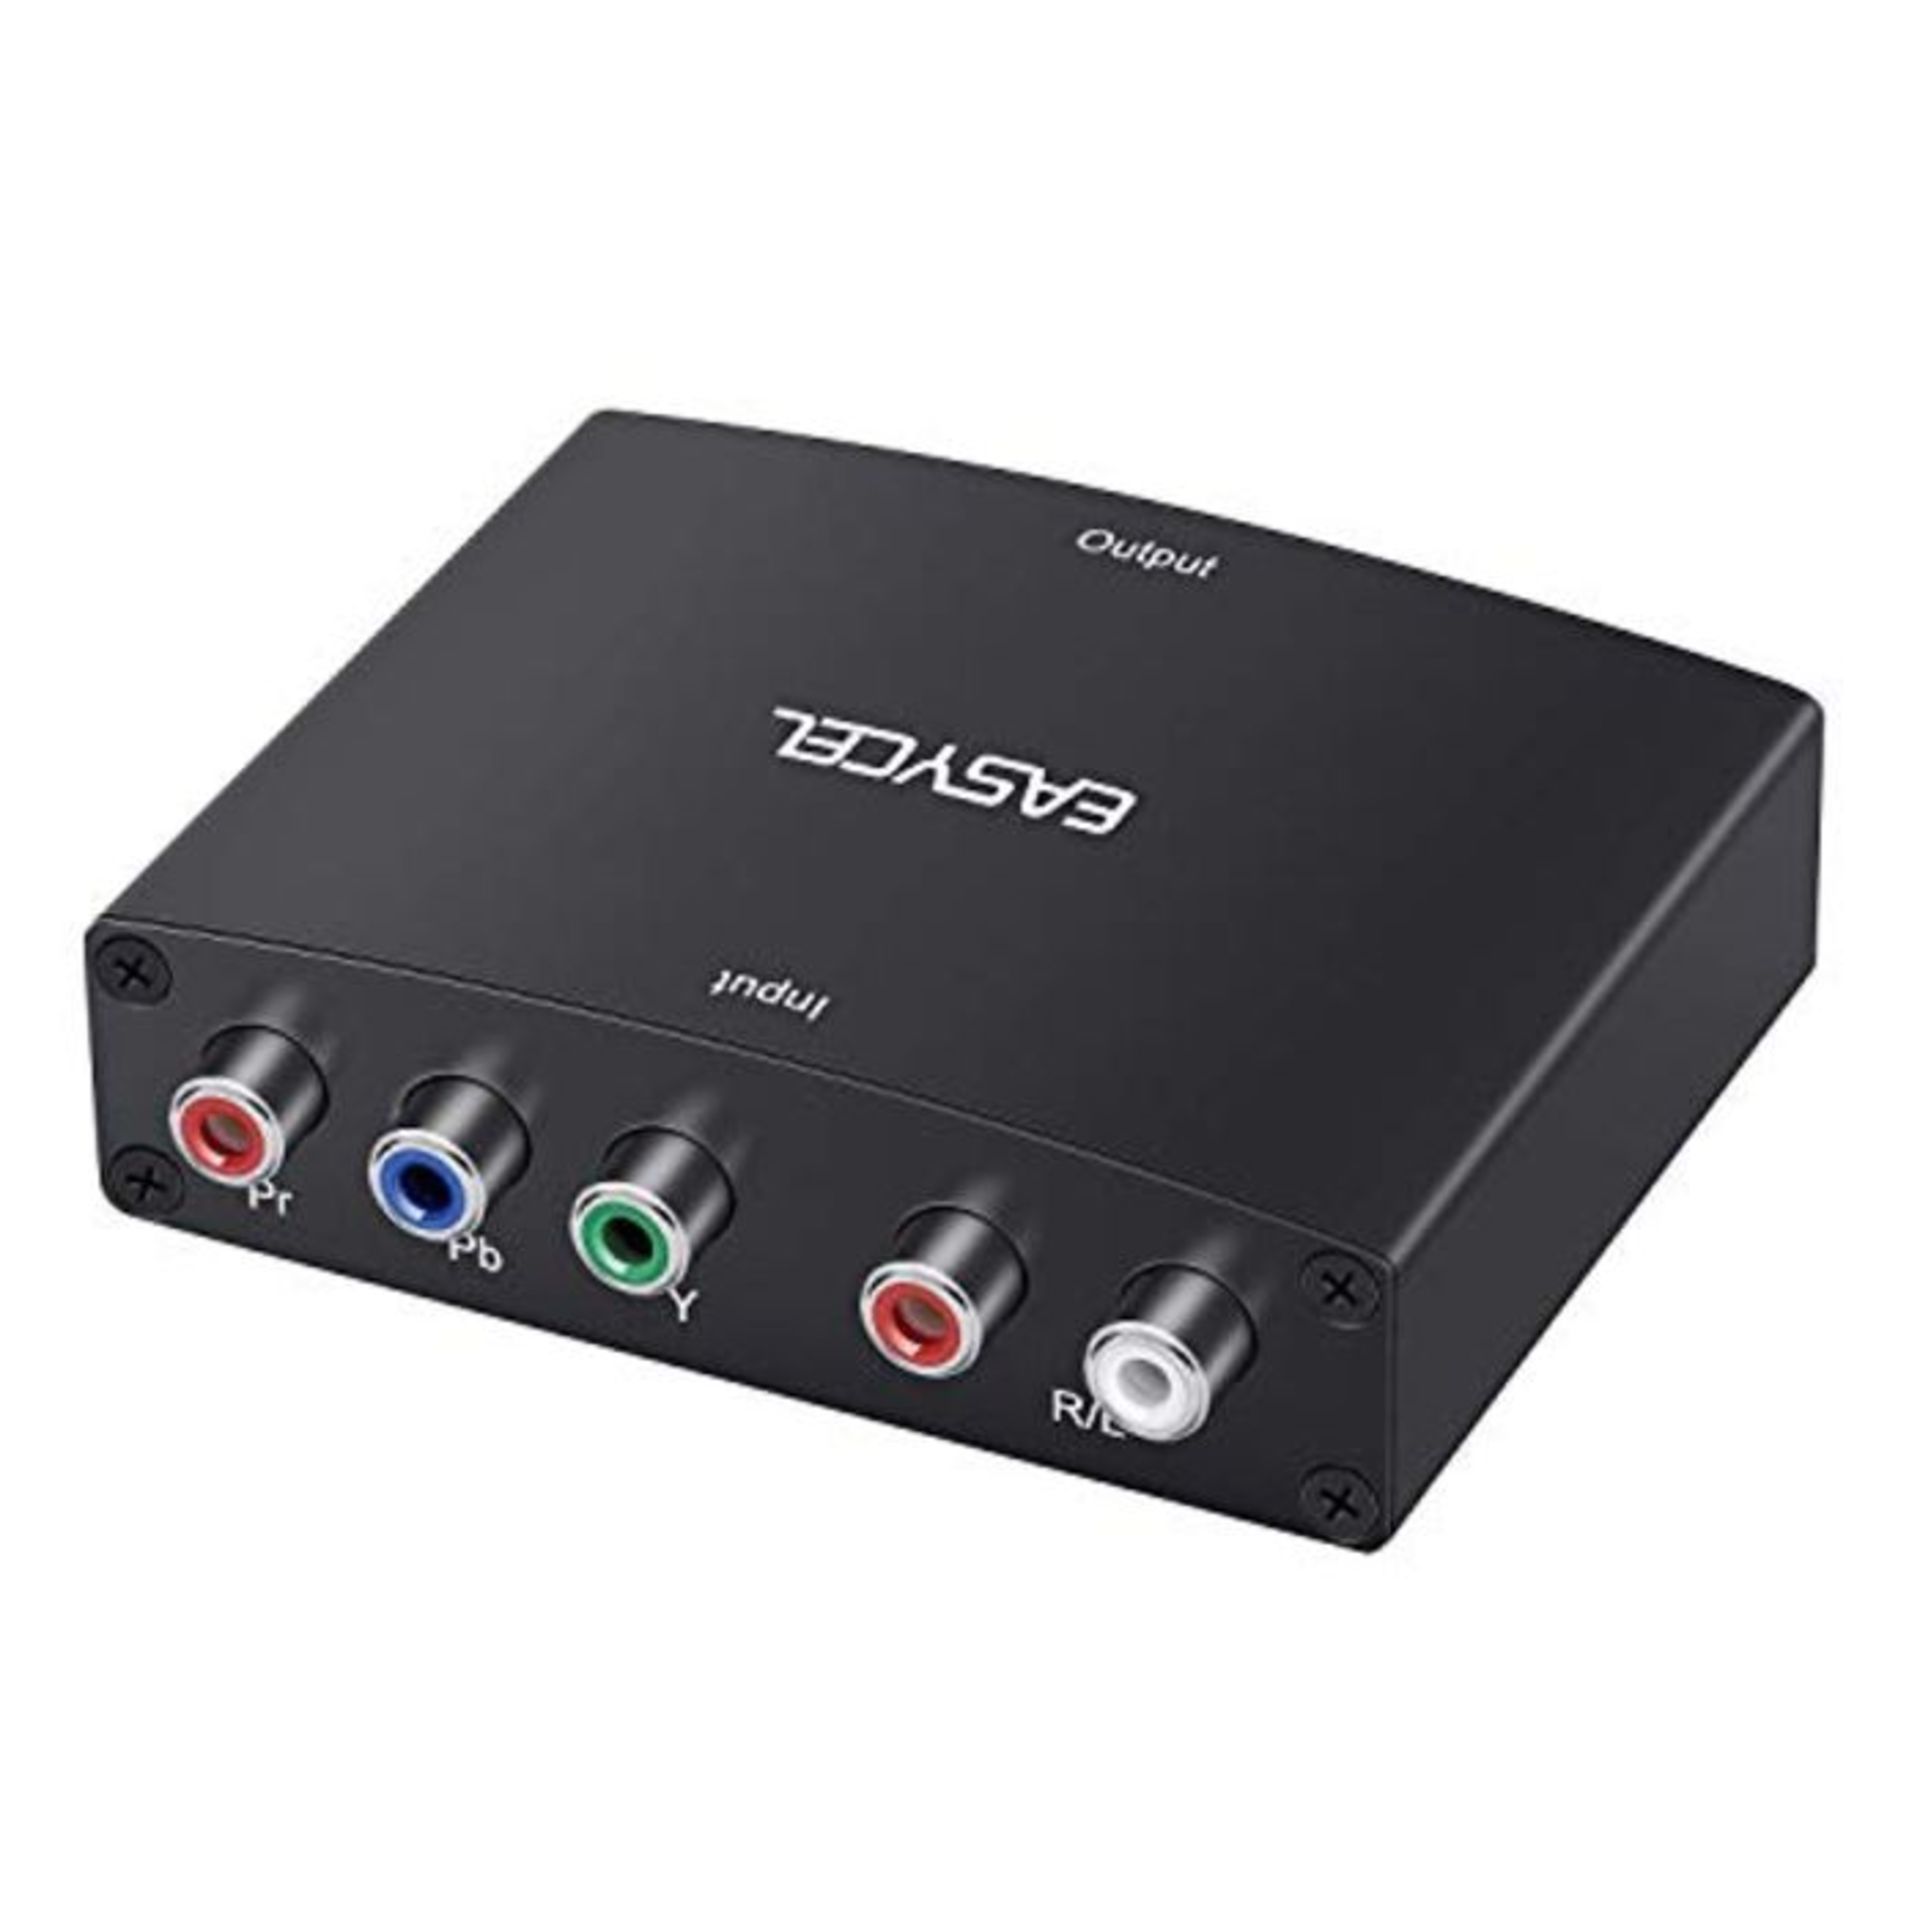 EASYCEL Component to HDMI Converter, RGB YPbPr to HDMI Converter Supports 1080P Video